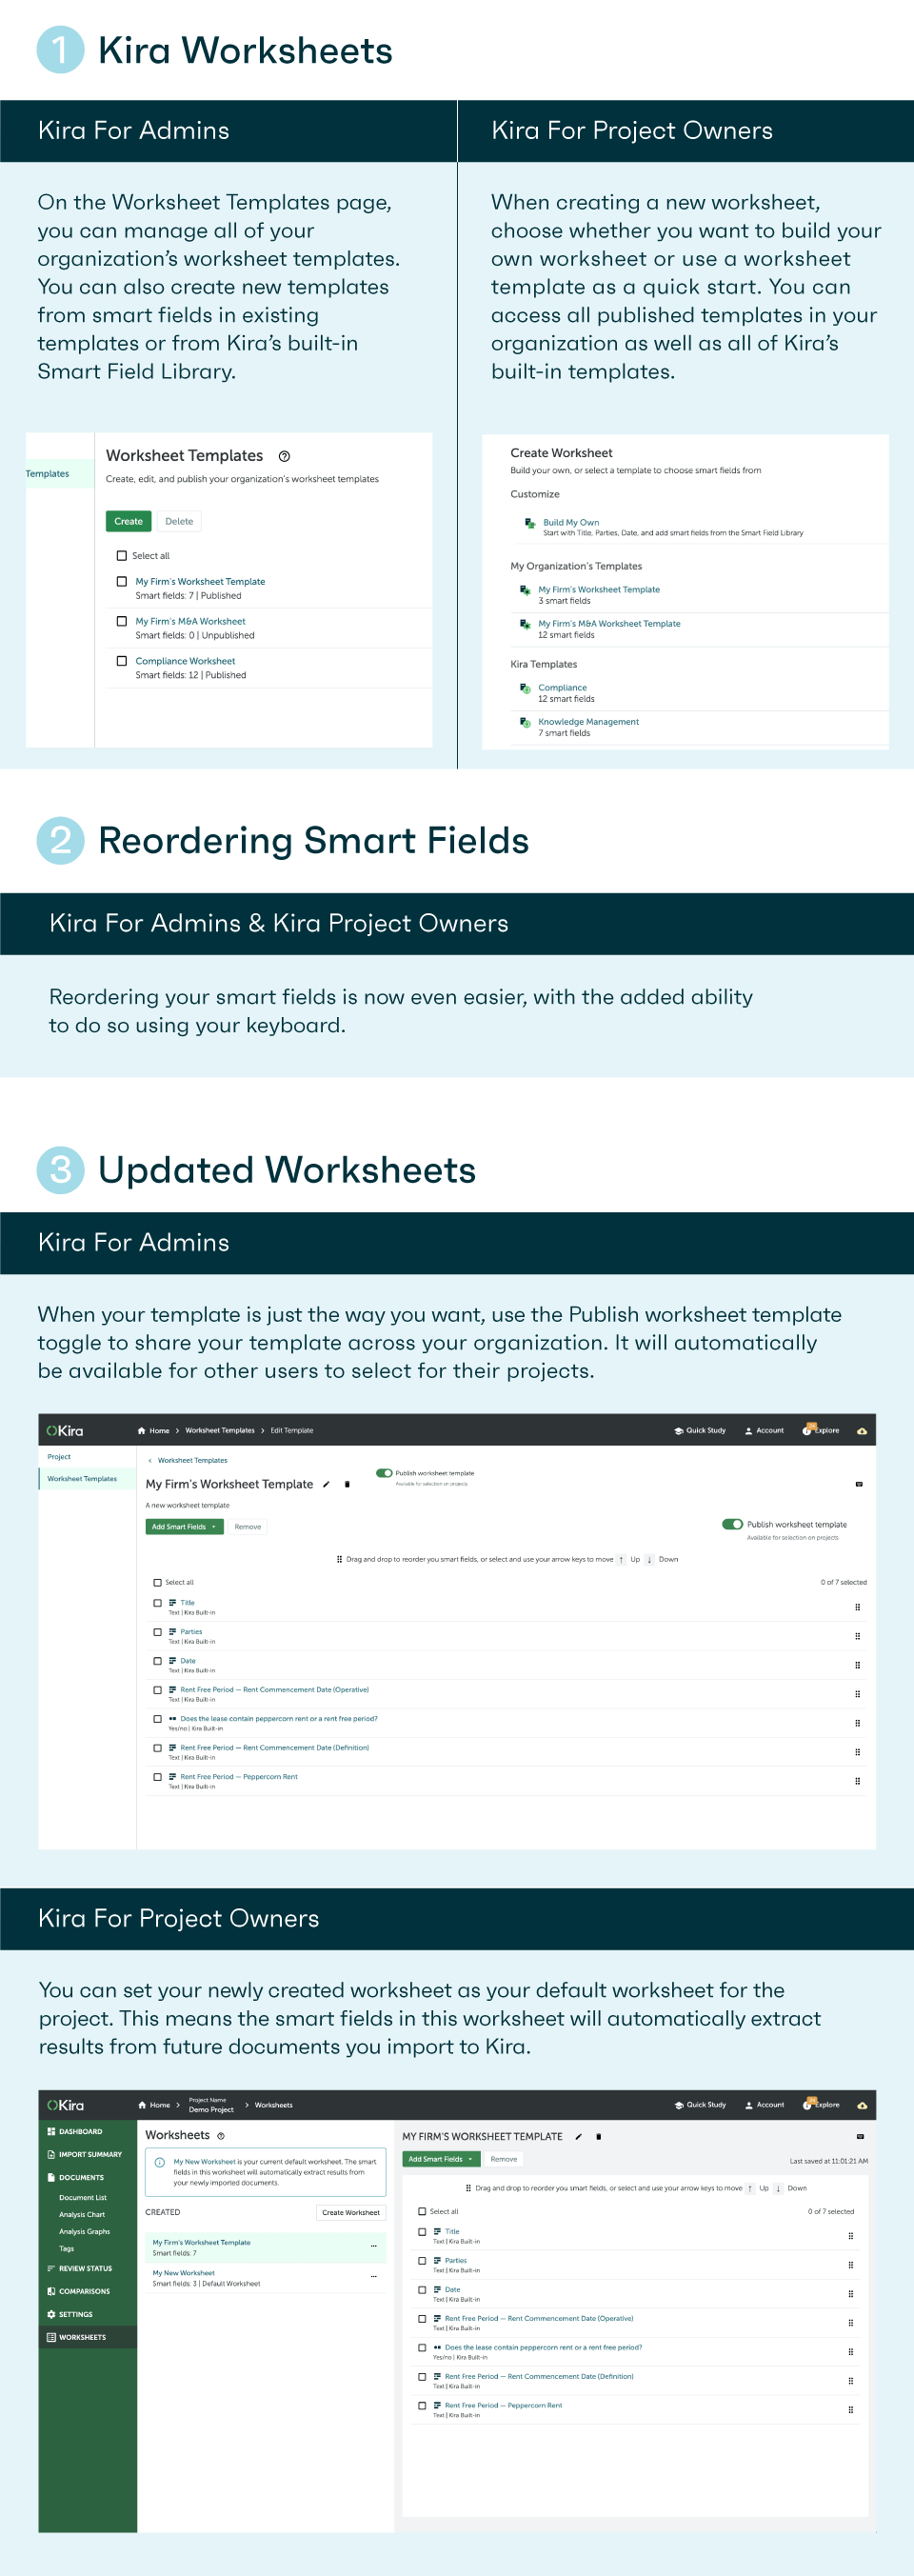 Overview of Kira Worksheets, Reordering Smart Fields, Updated Worksheets